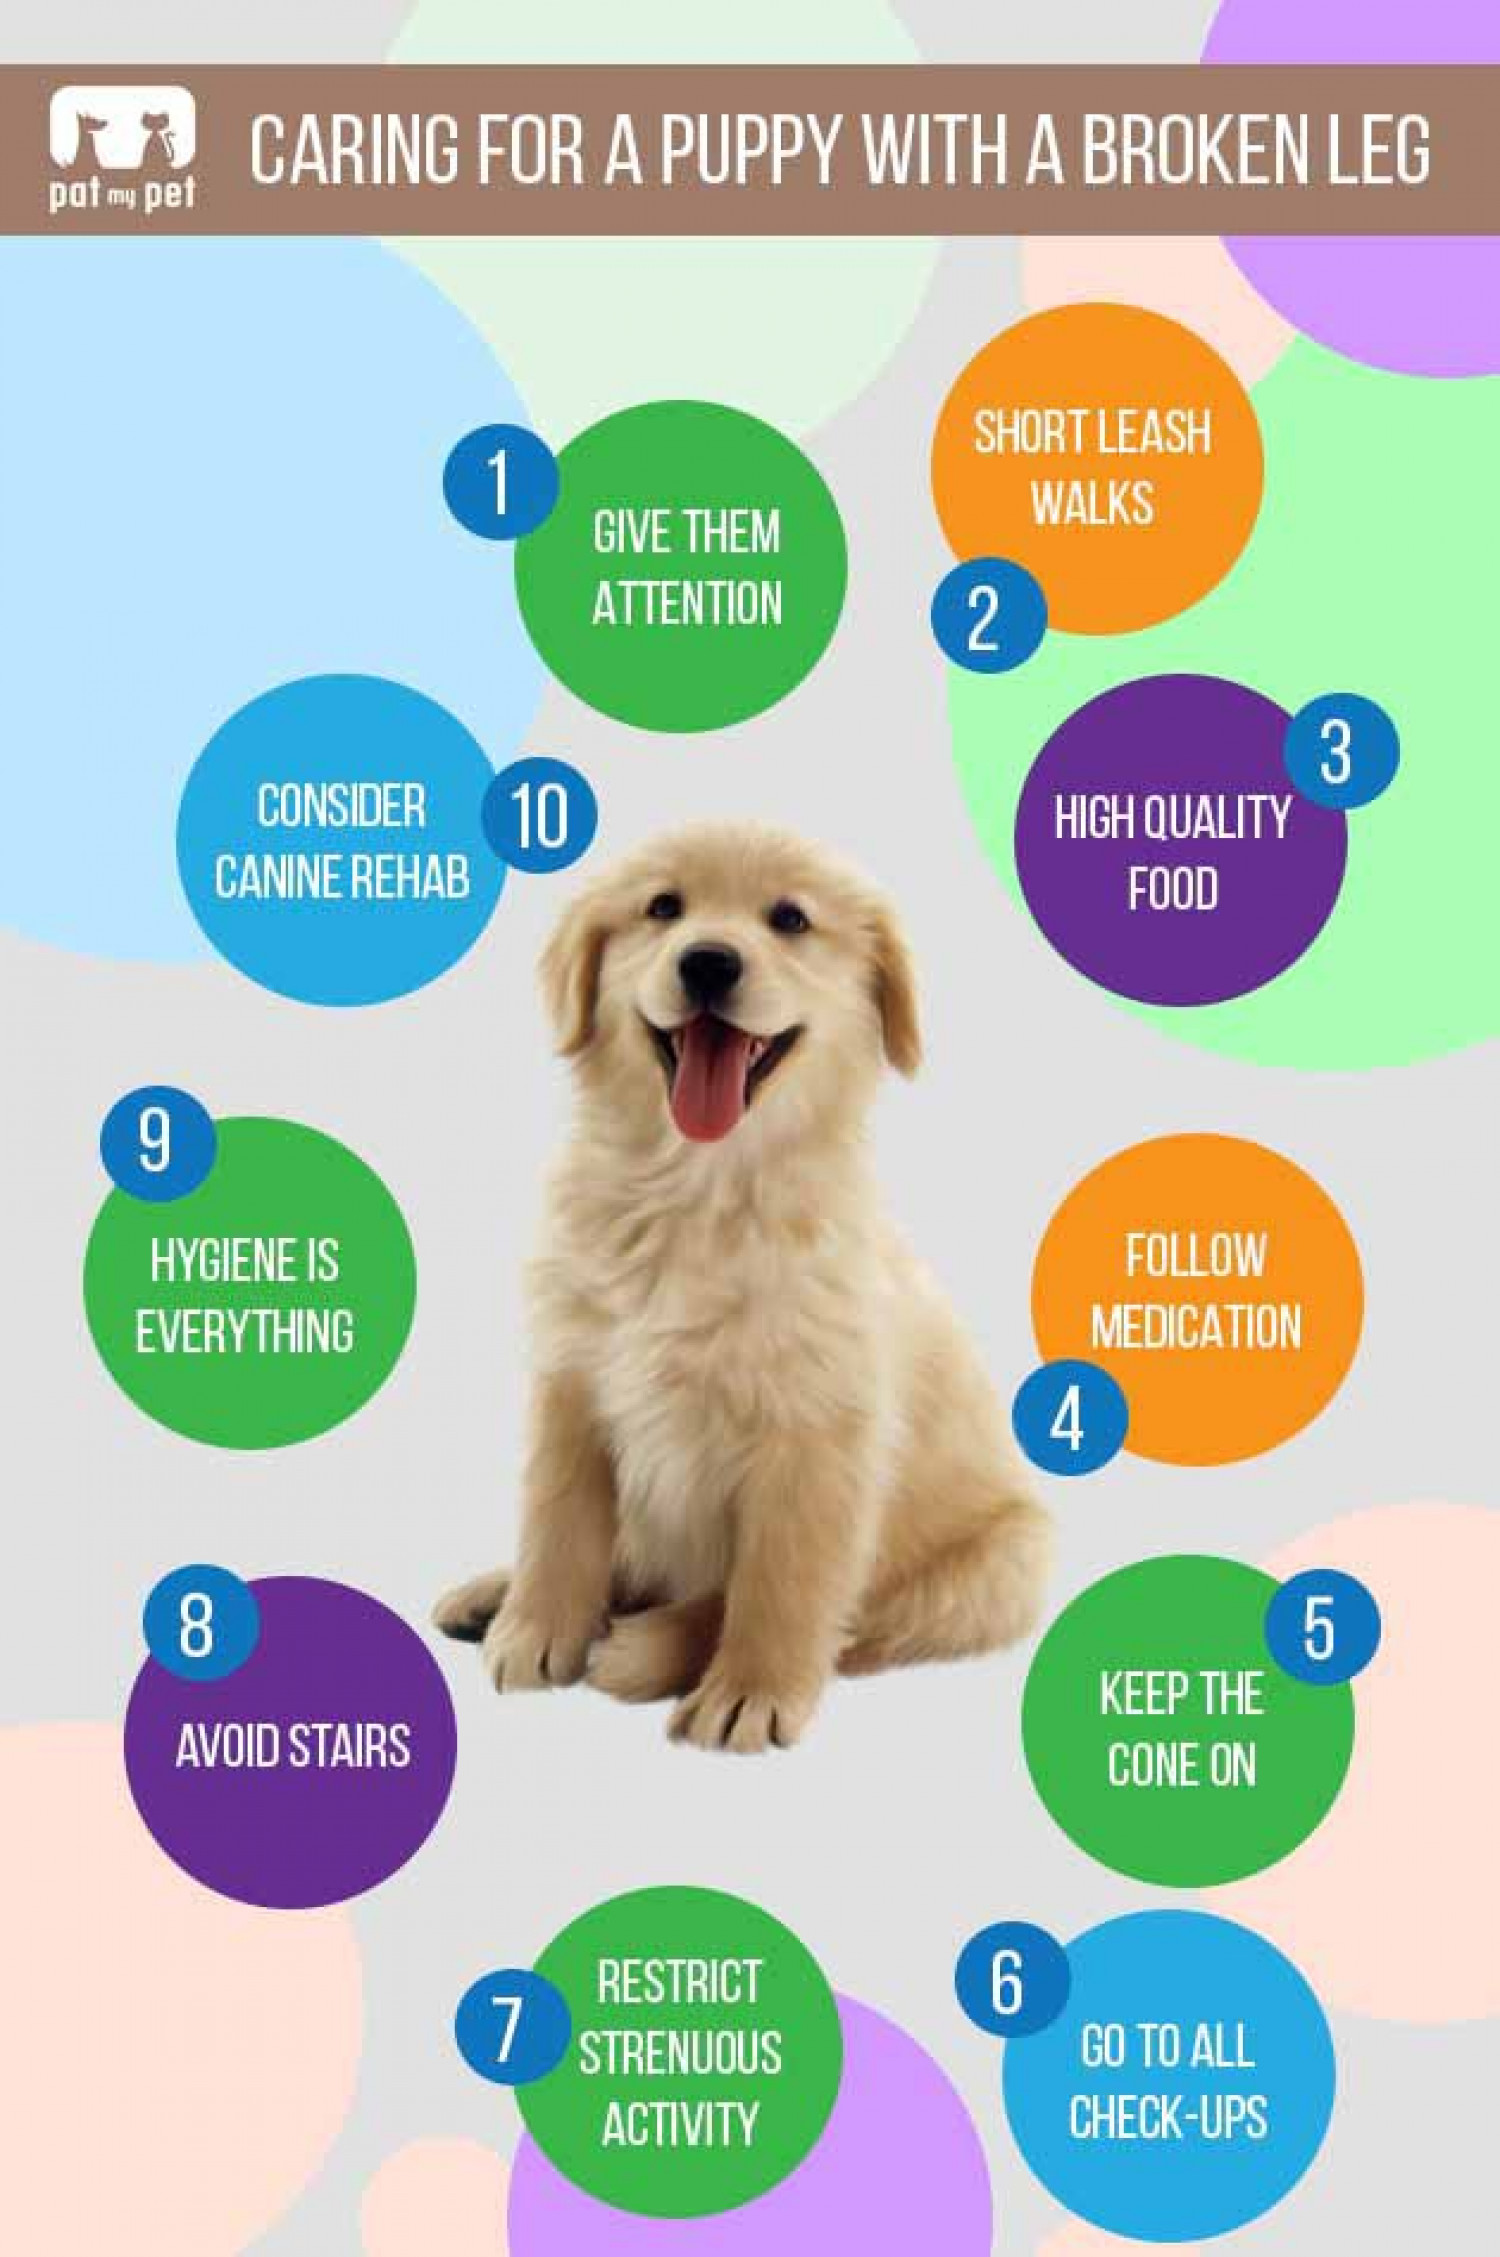 Caring For A Puppy With A Broken Leg Infographic